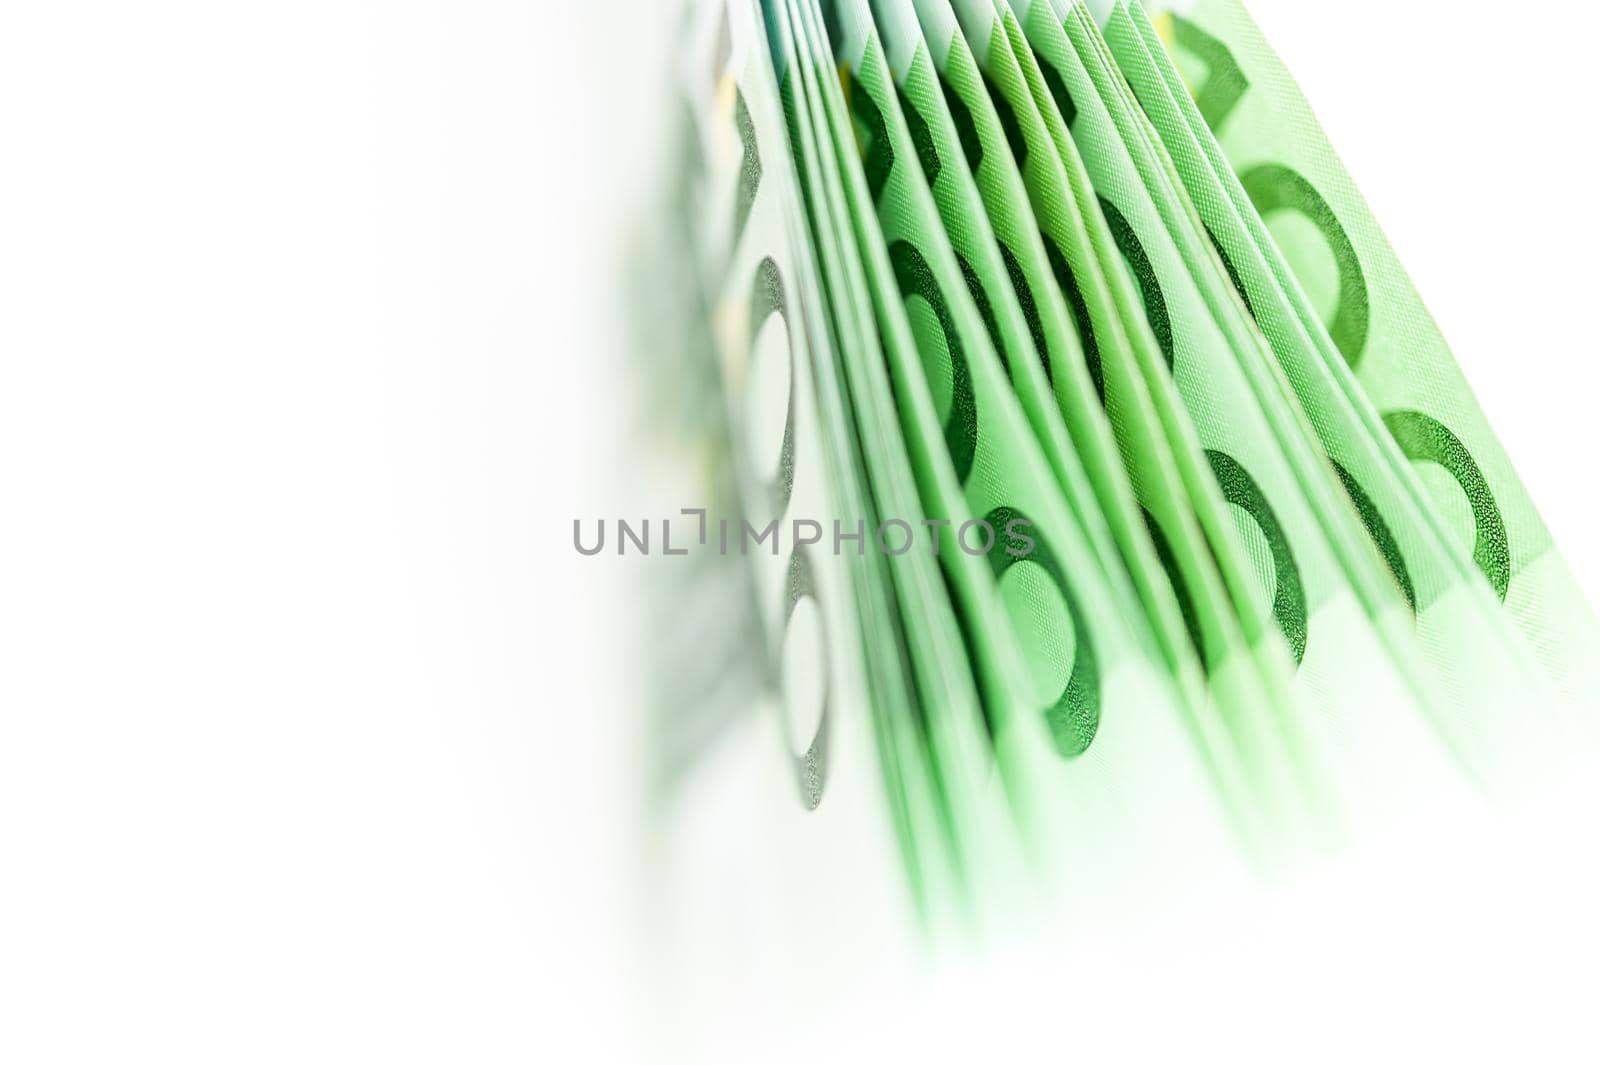 Euro money, Euro cash background. Banknotes of the european union on a white background. Shallow depth of field. by bashta